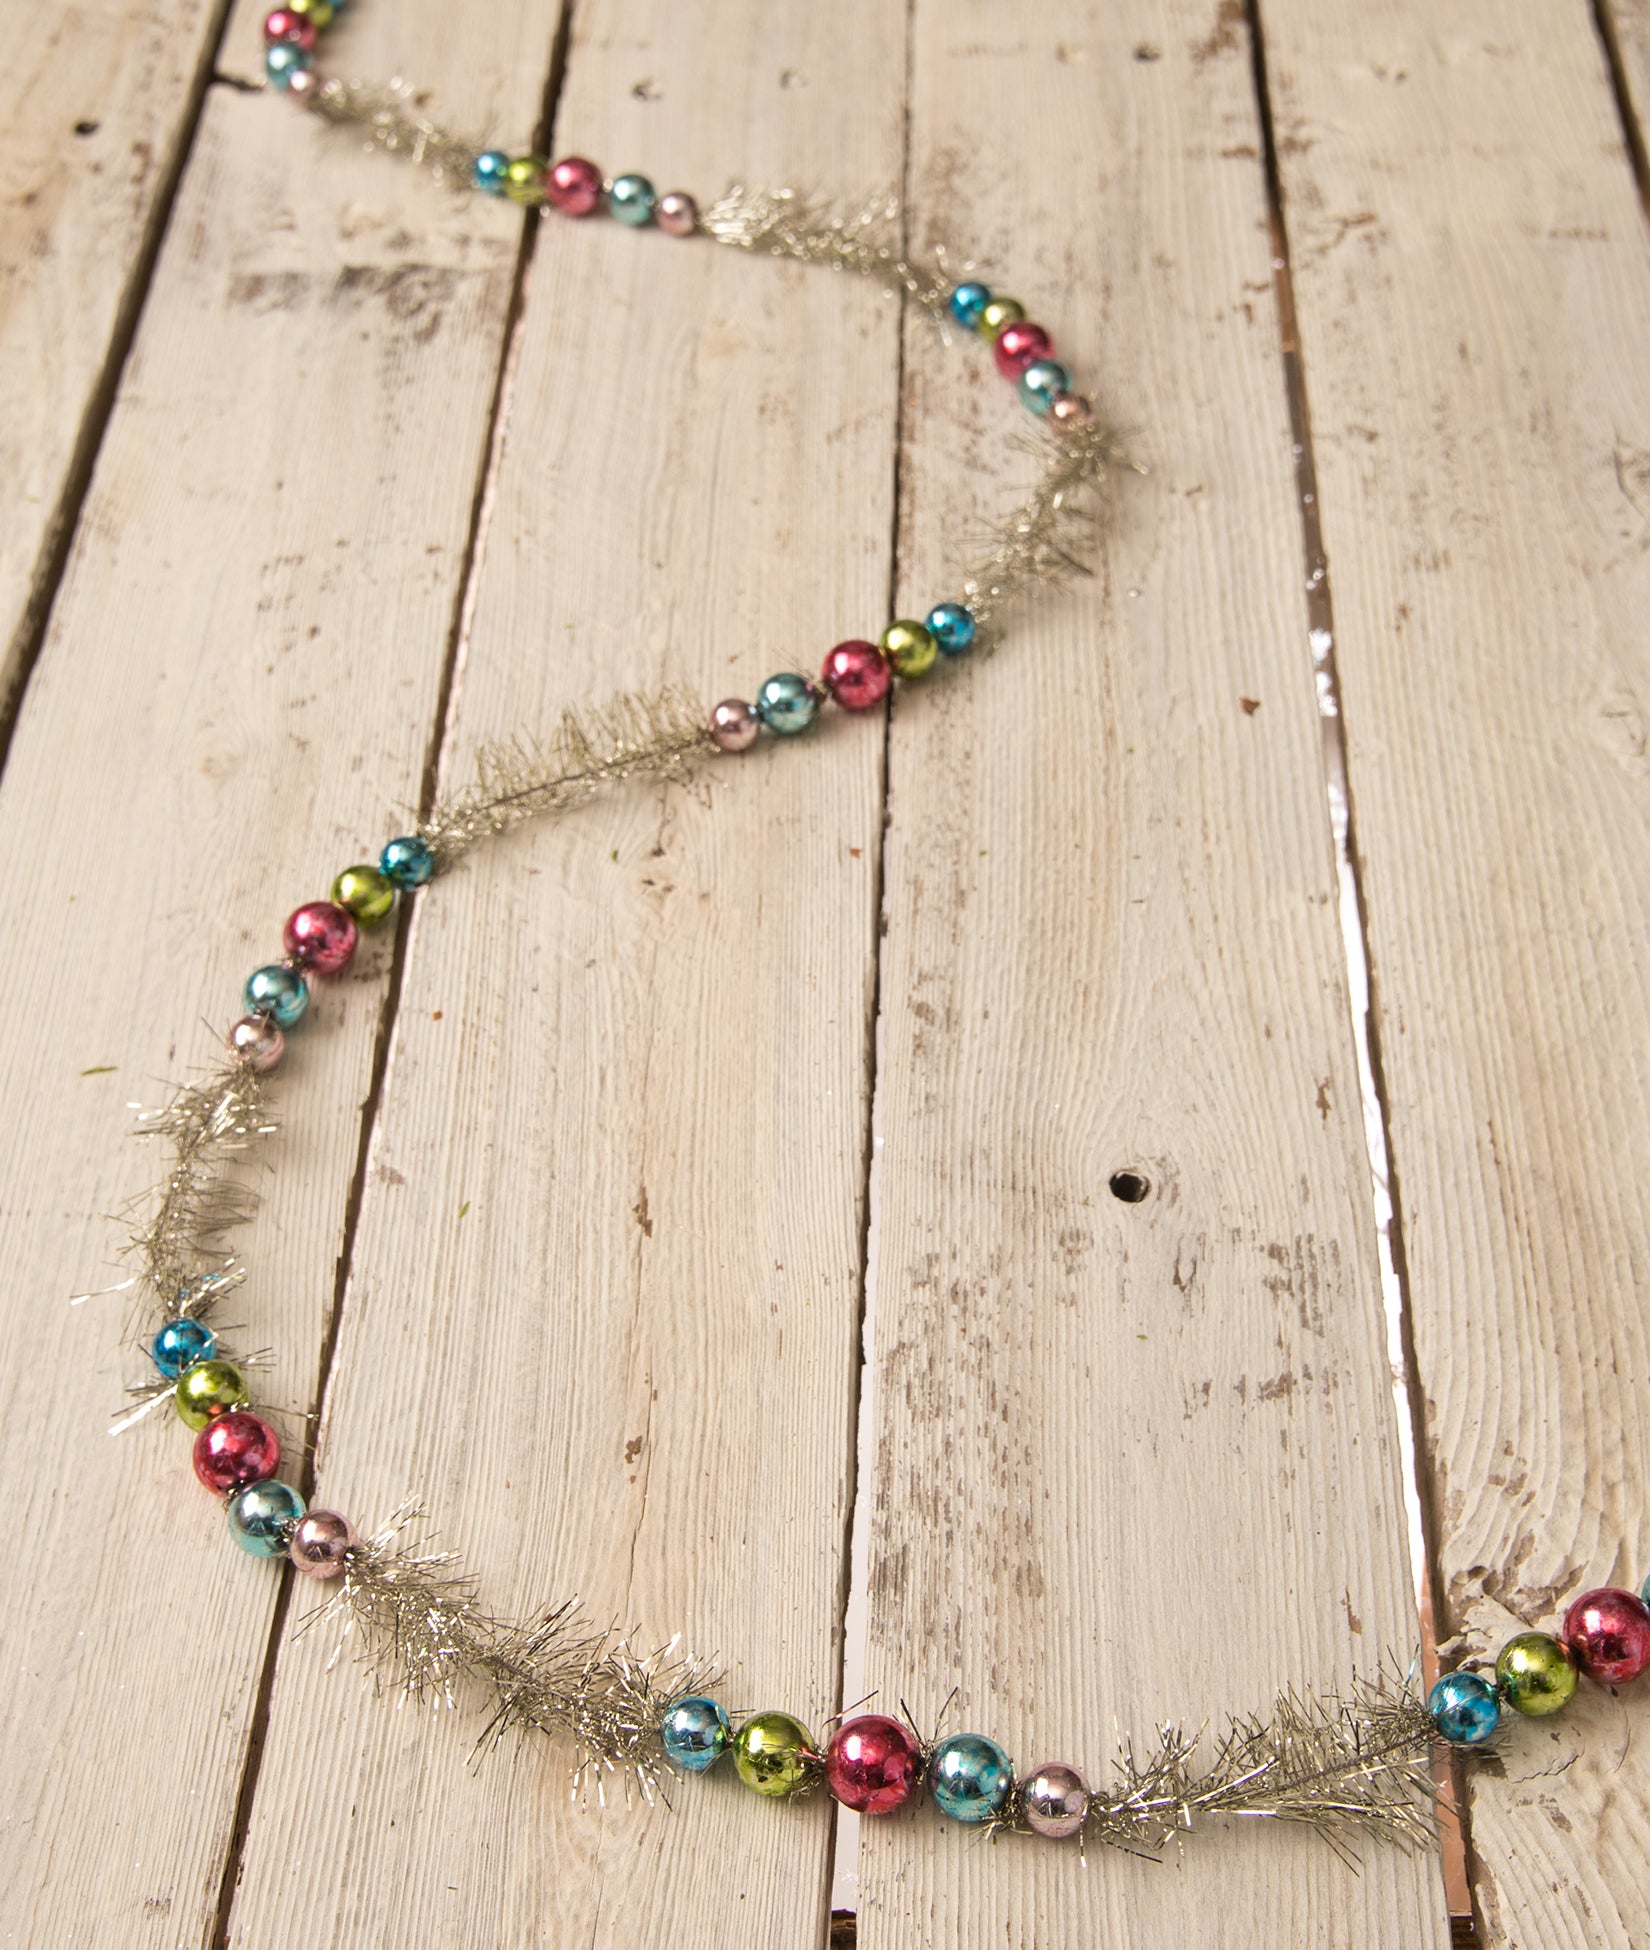 Brights Bead & Tinsel Garland with pink, blue, green beads